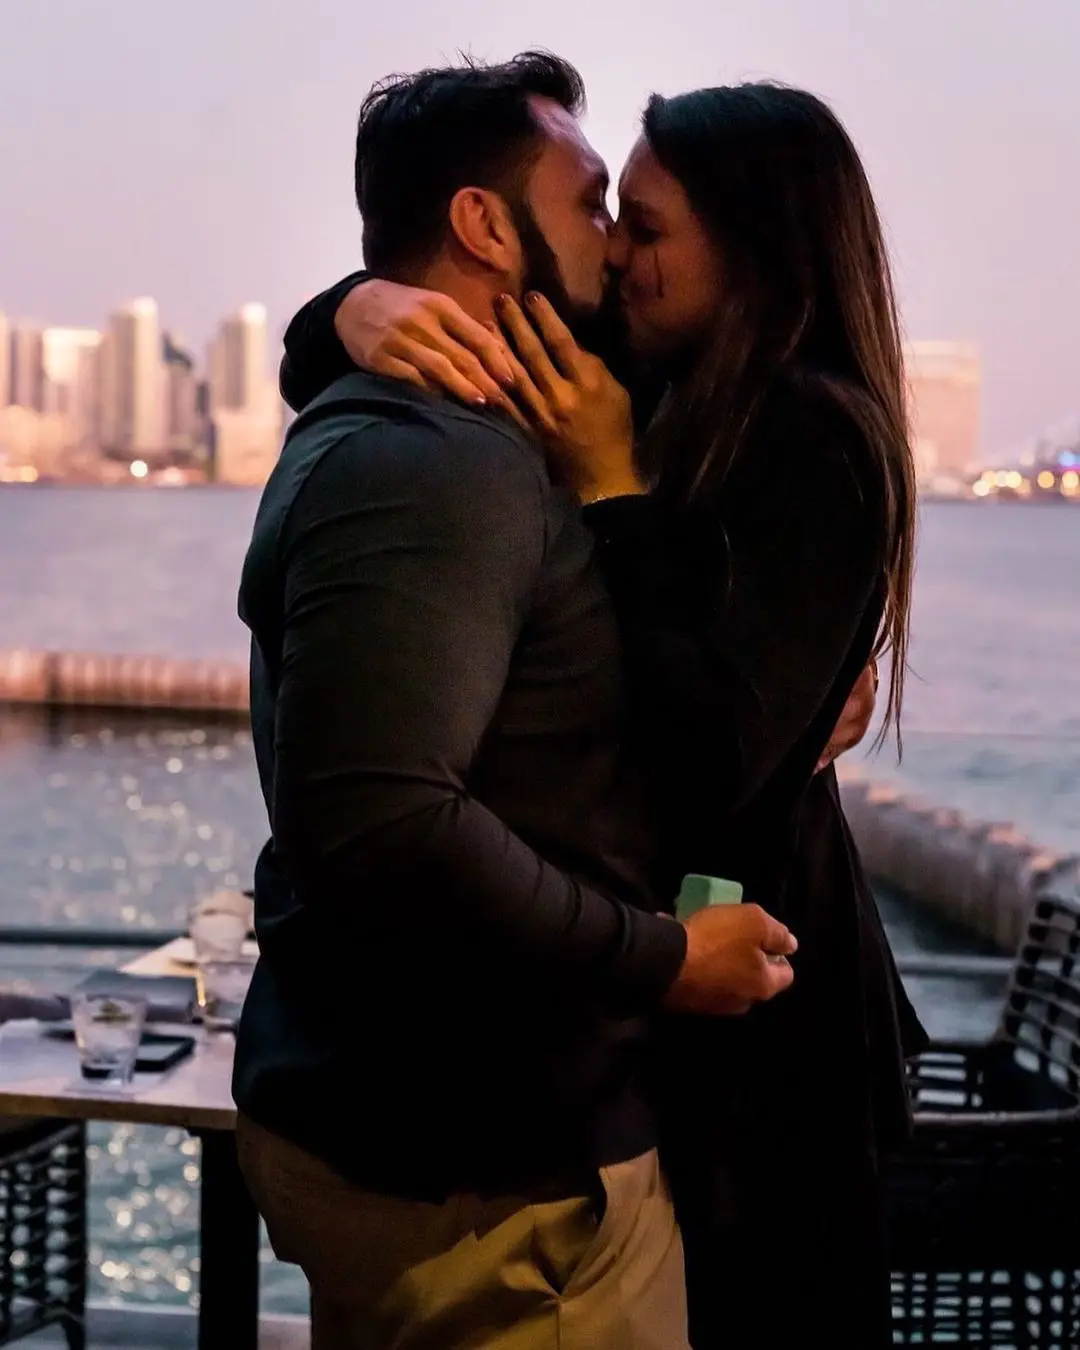 Alex proposed Abby in October, 2019 at Harbor Island, San Diego.